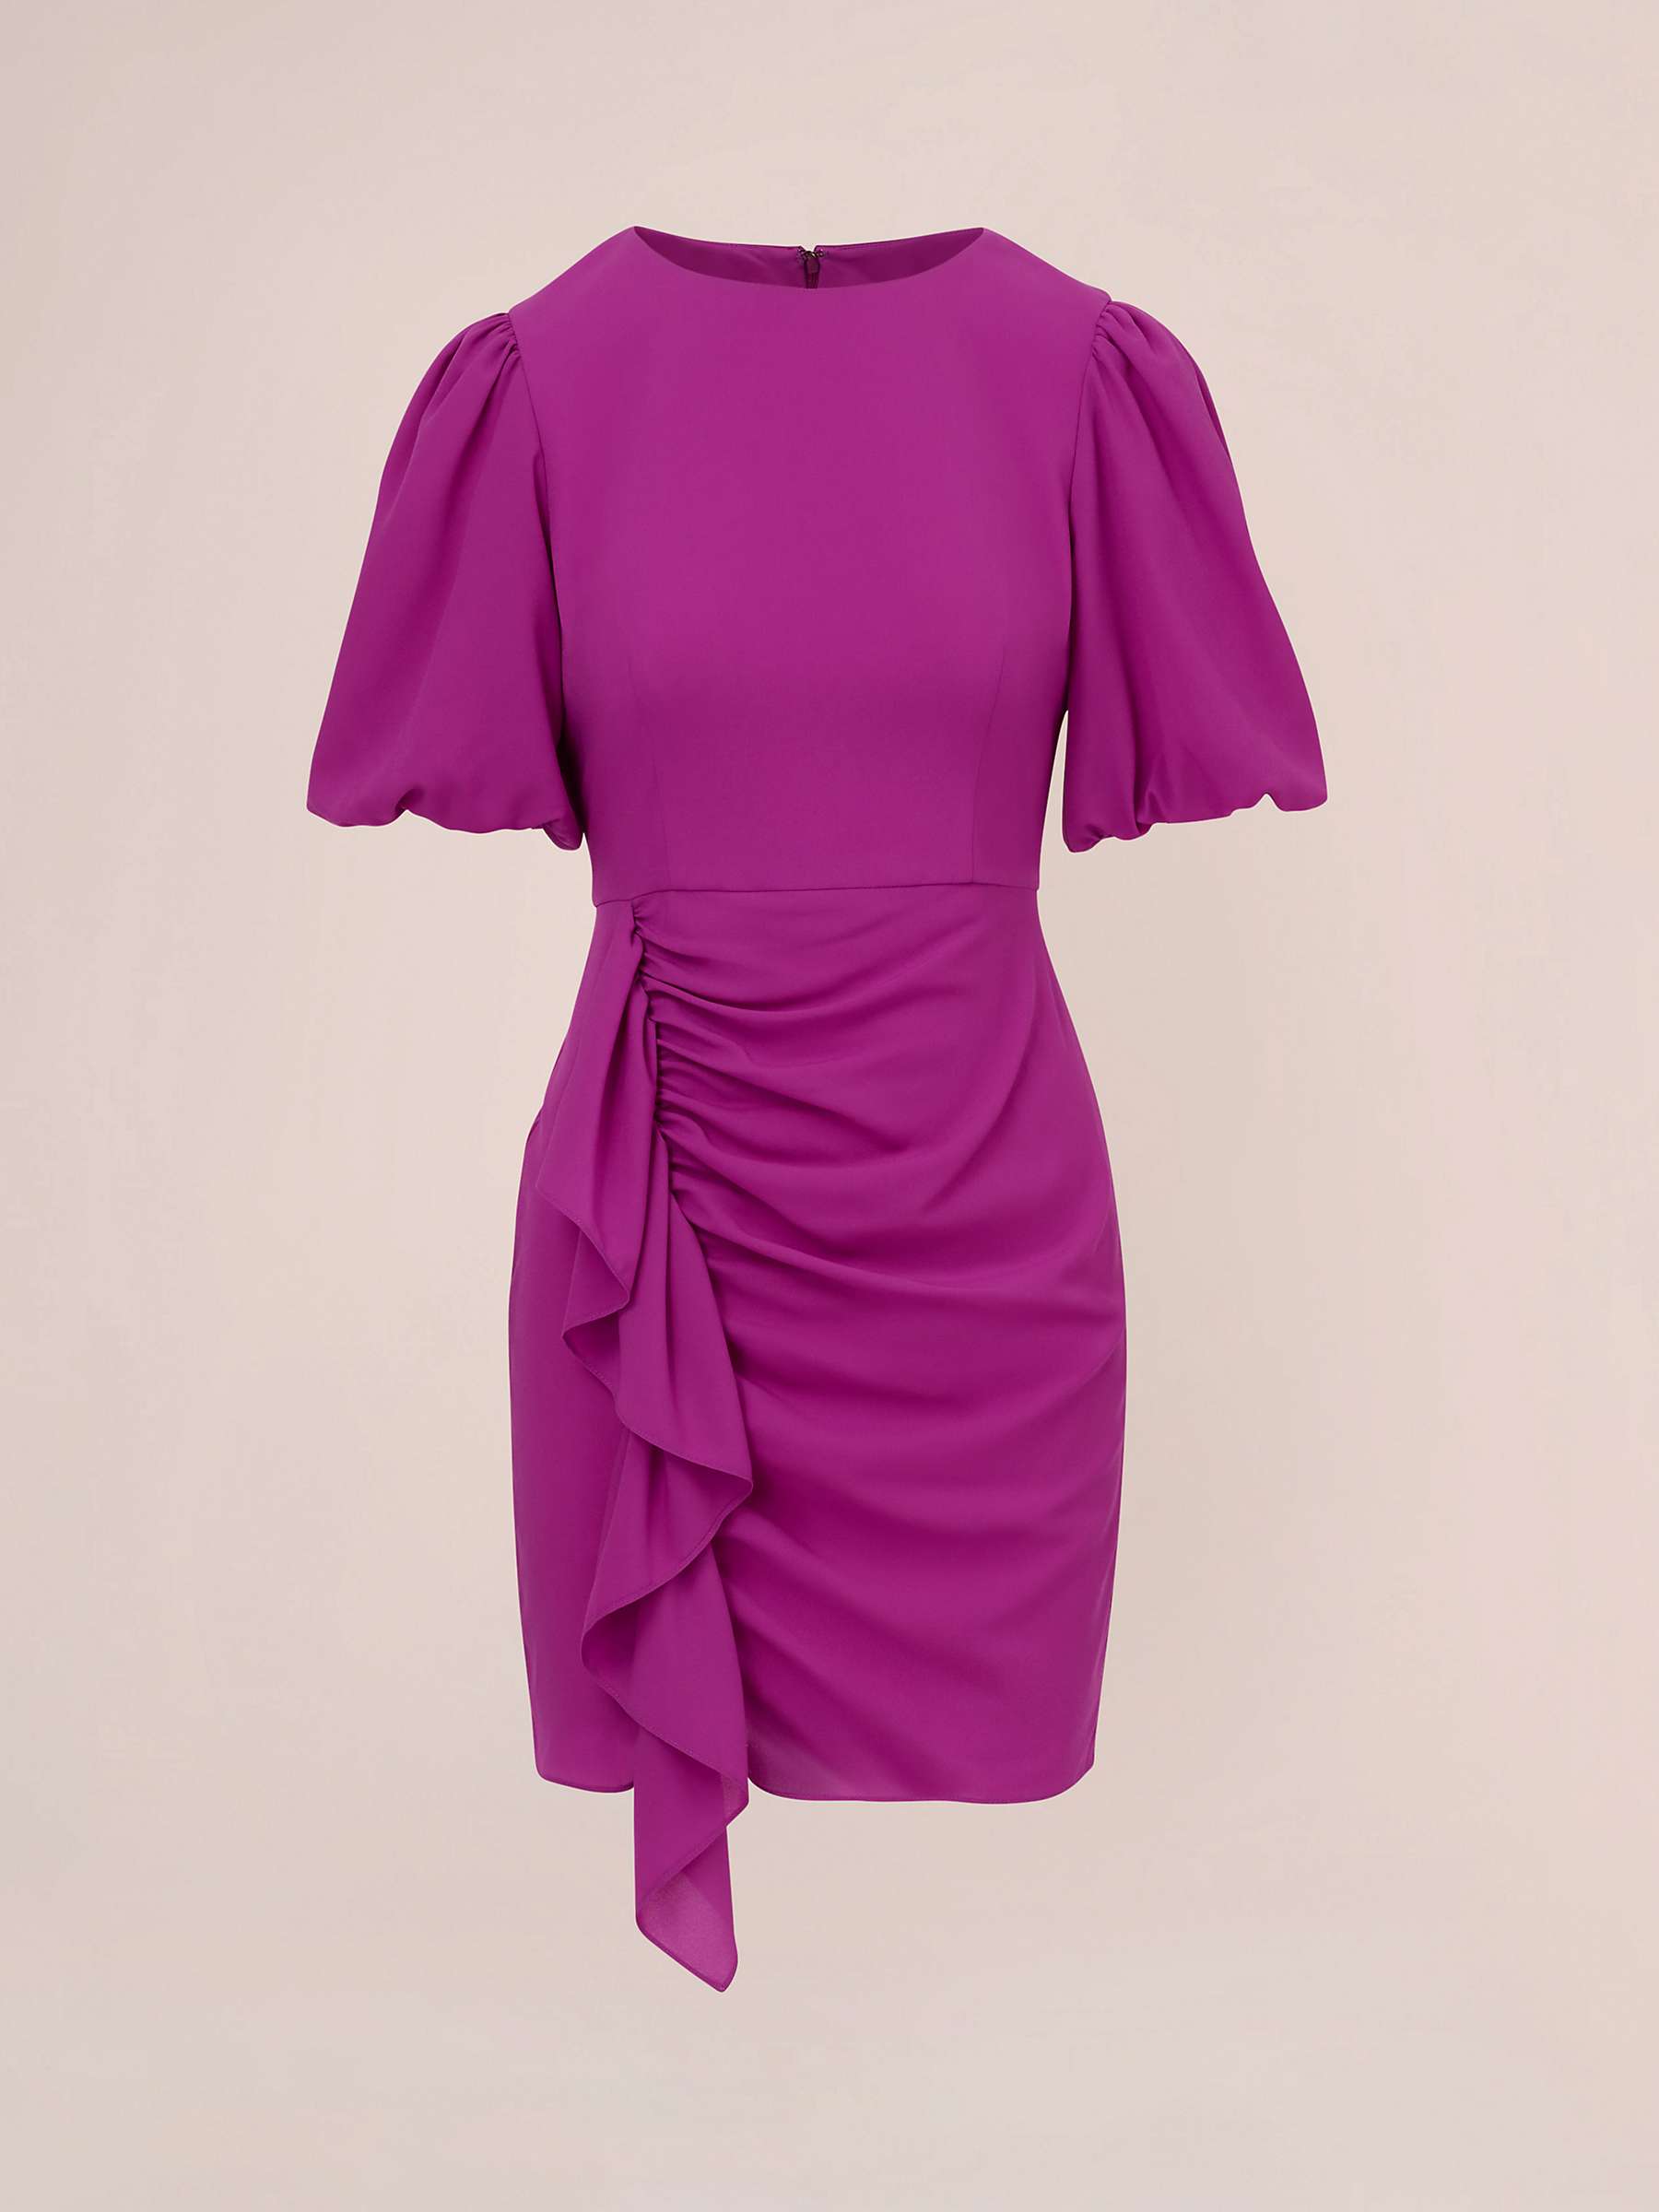 Buy Aidan by Adrianna Papell Stretch Mini Cocktail Dress, Wild Orchid Online at johnlewis.com